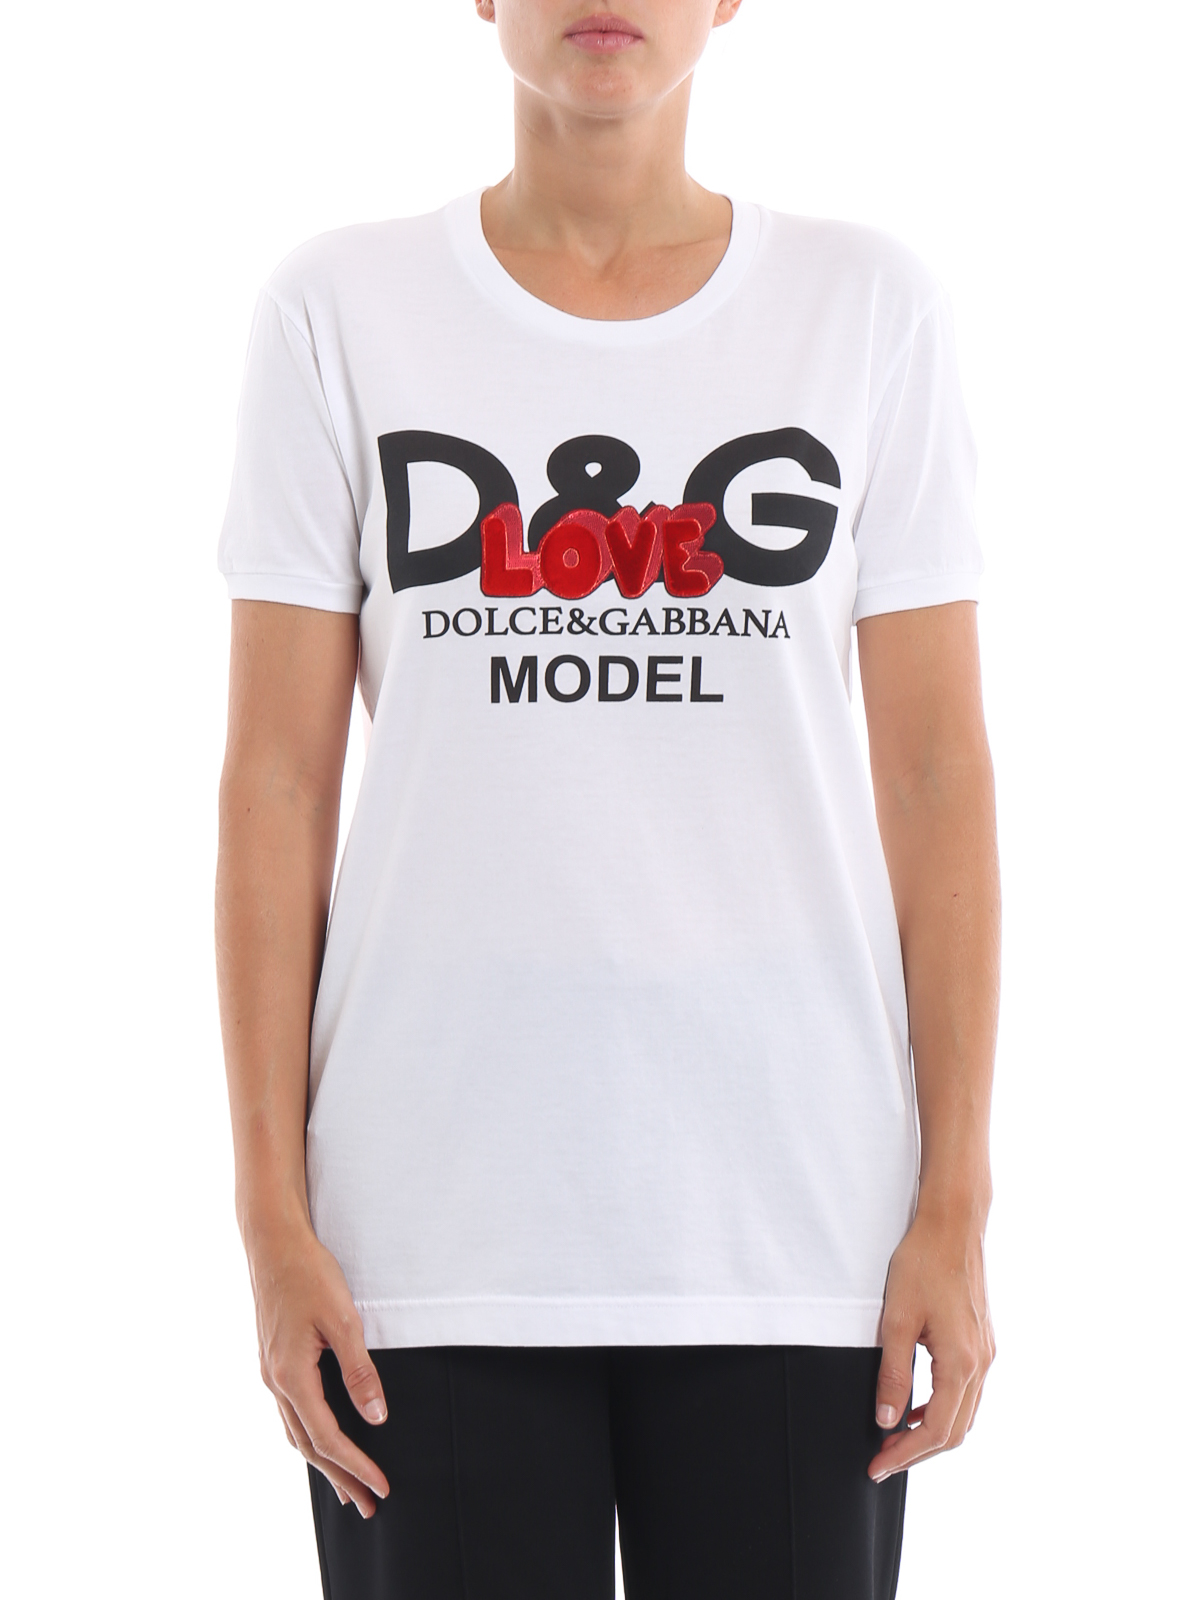 Dolce & Gabbana - D&G Model Love embroidery white Tee - t-shirts ...